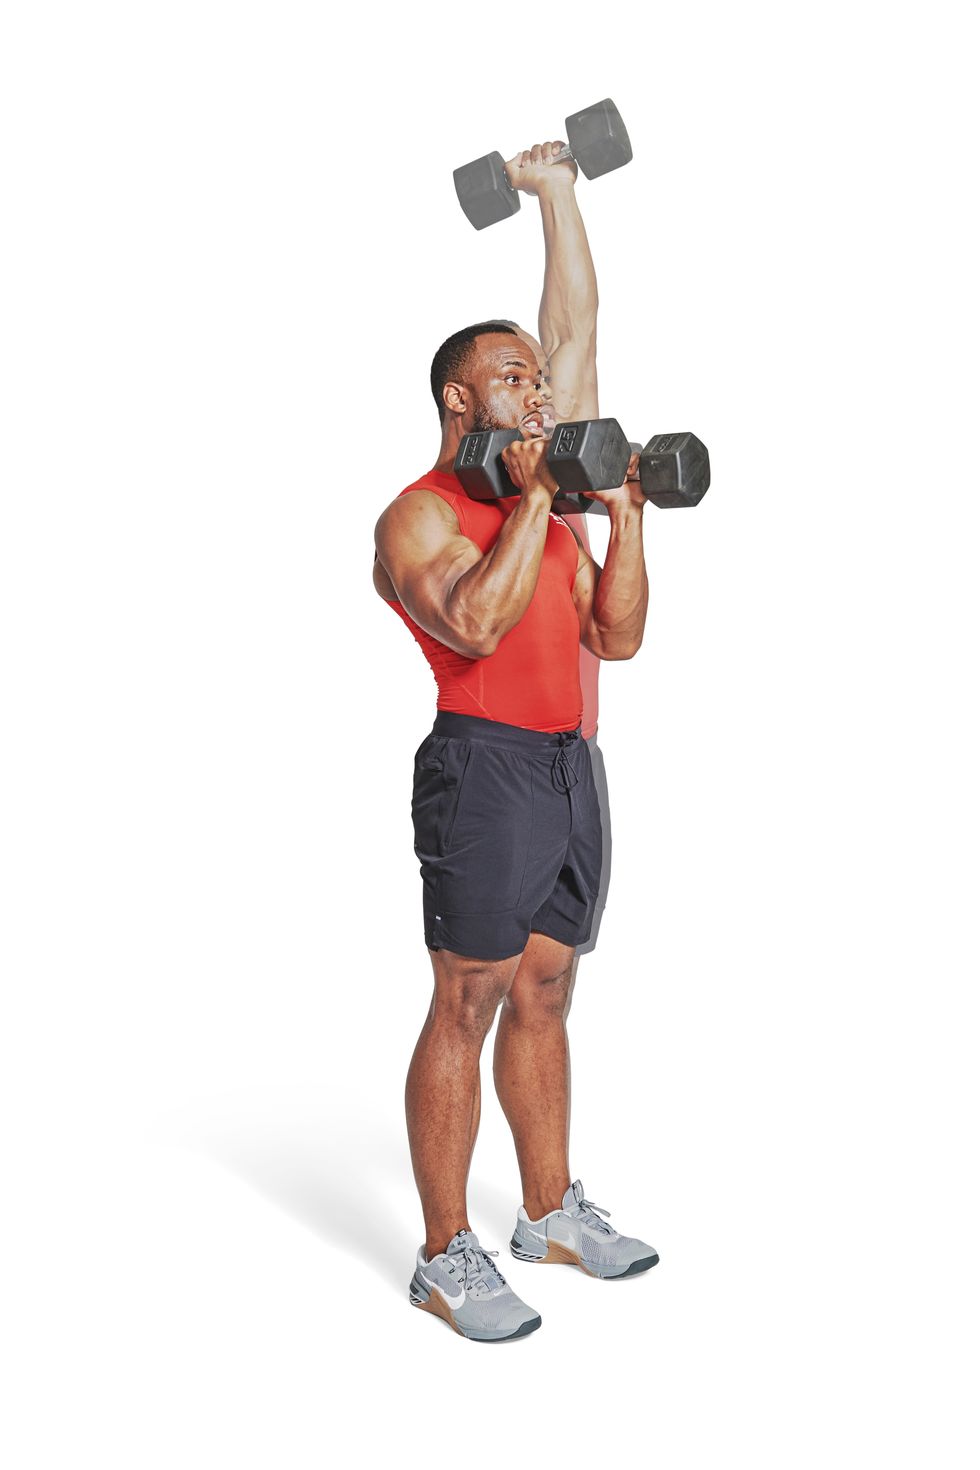 Try This Total Body Dumbbell Workout for New Year's Fitness 2023